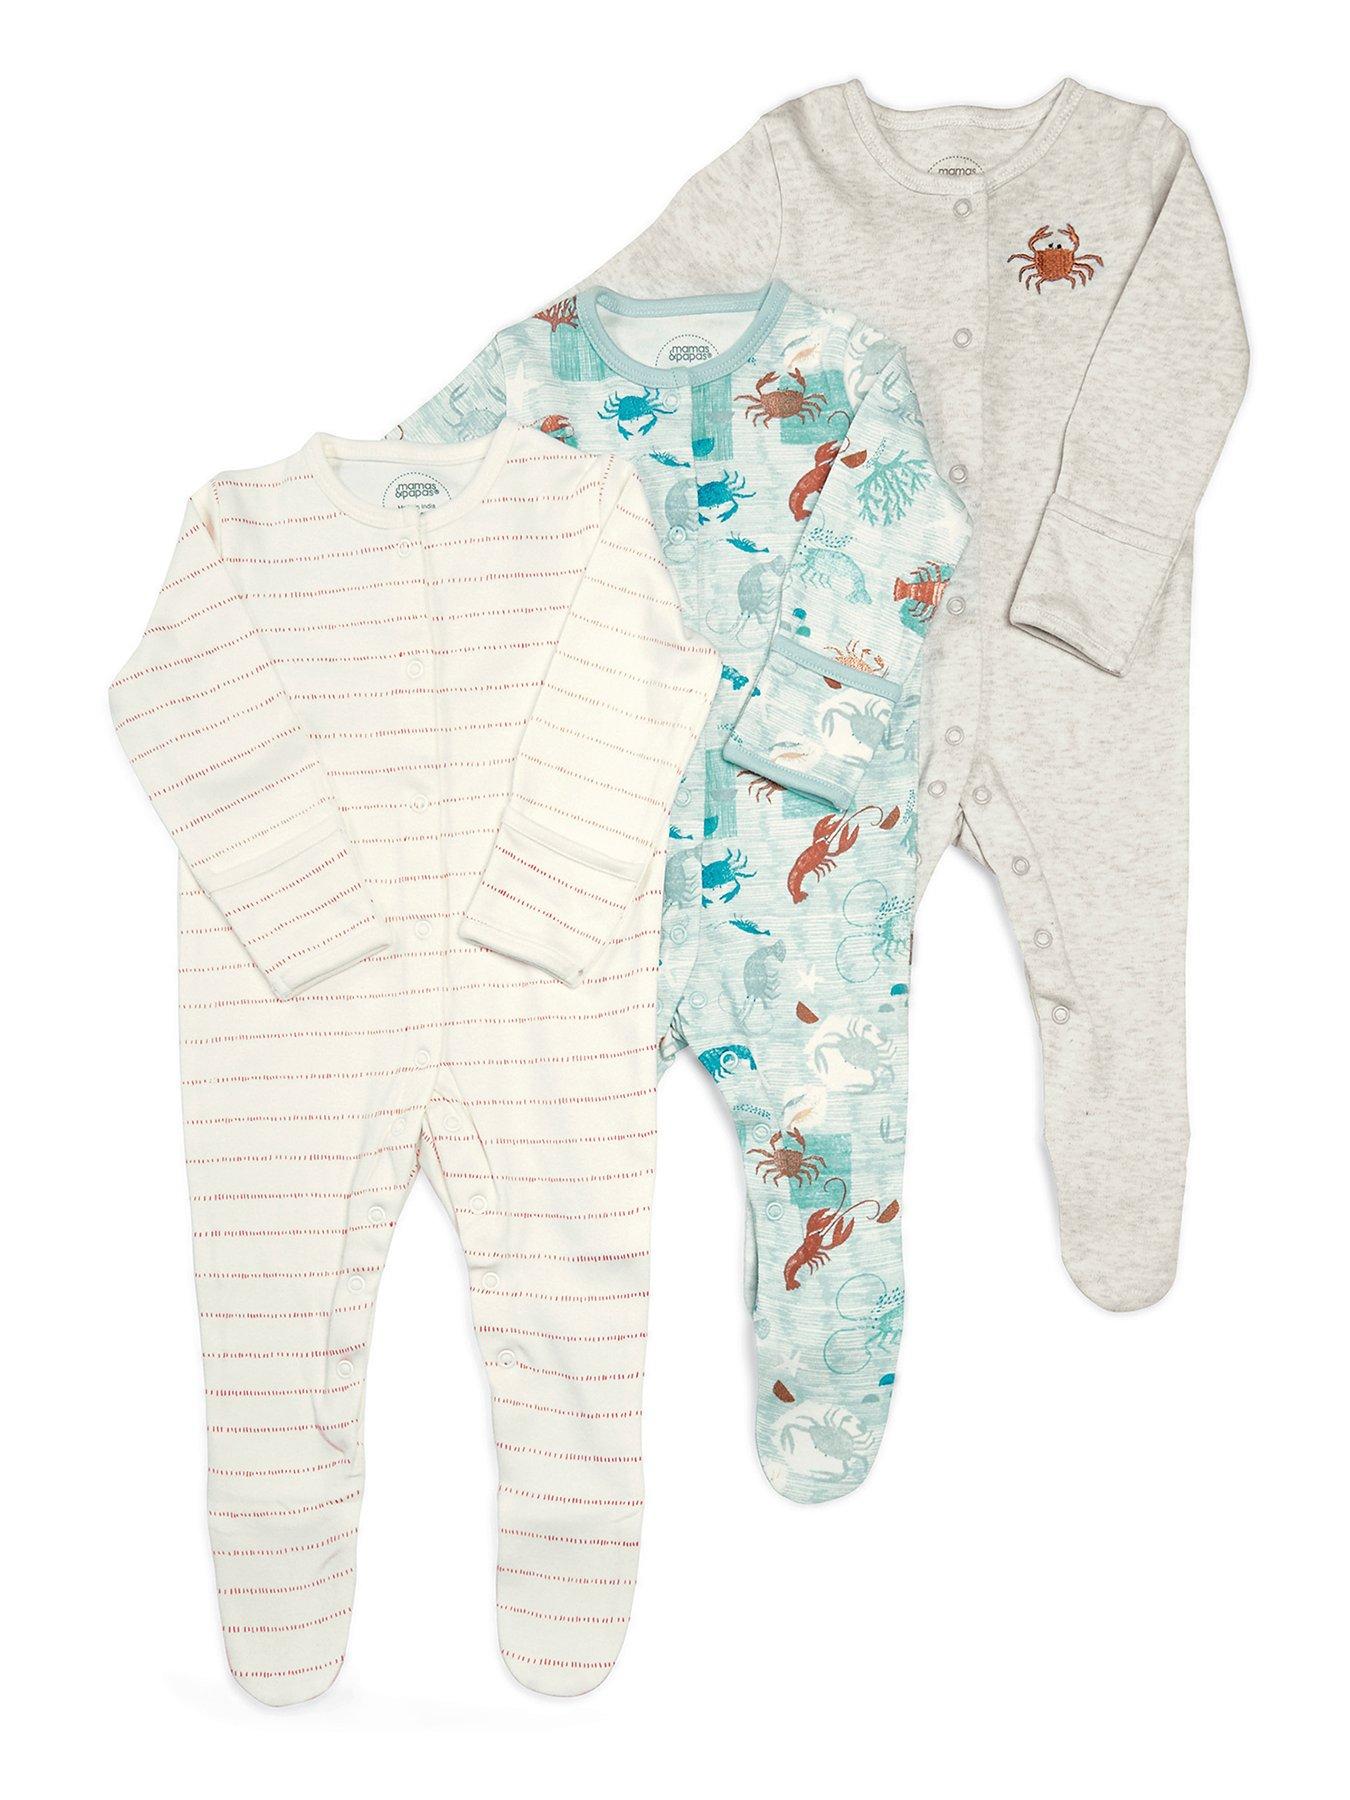 mamas and papas baby sleepsuits